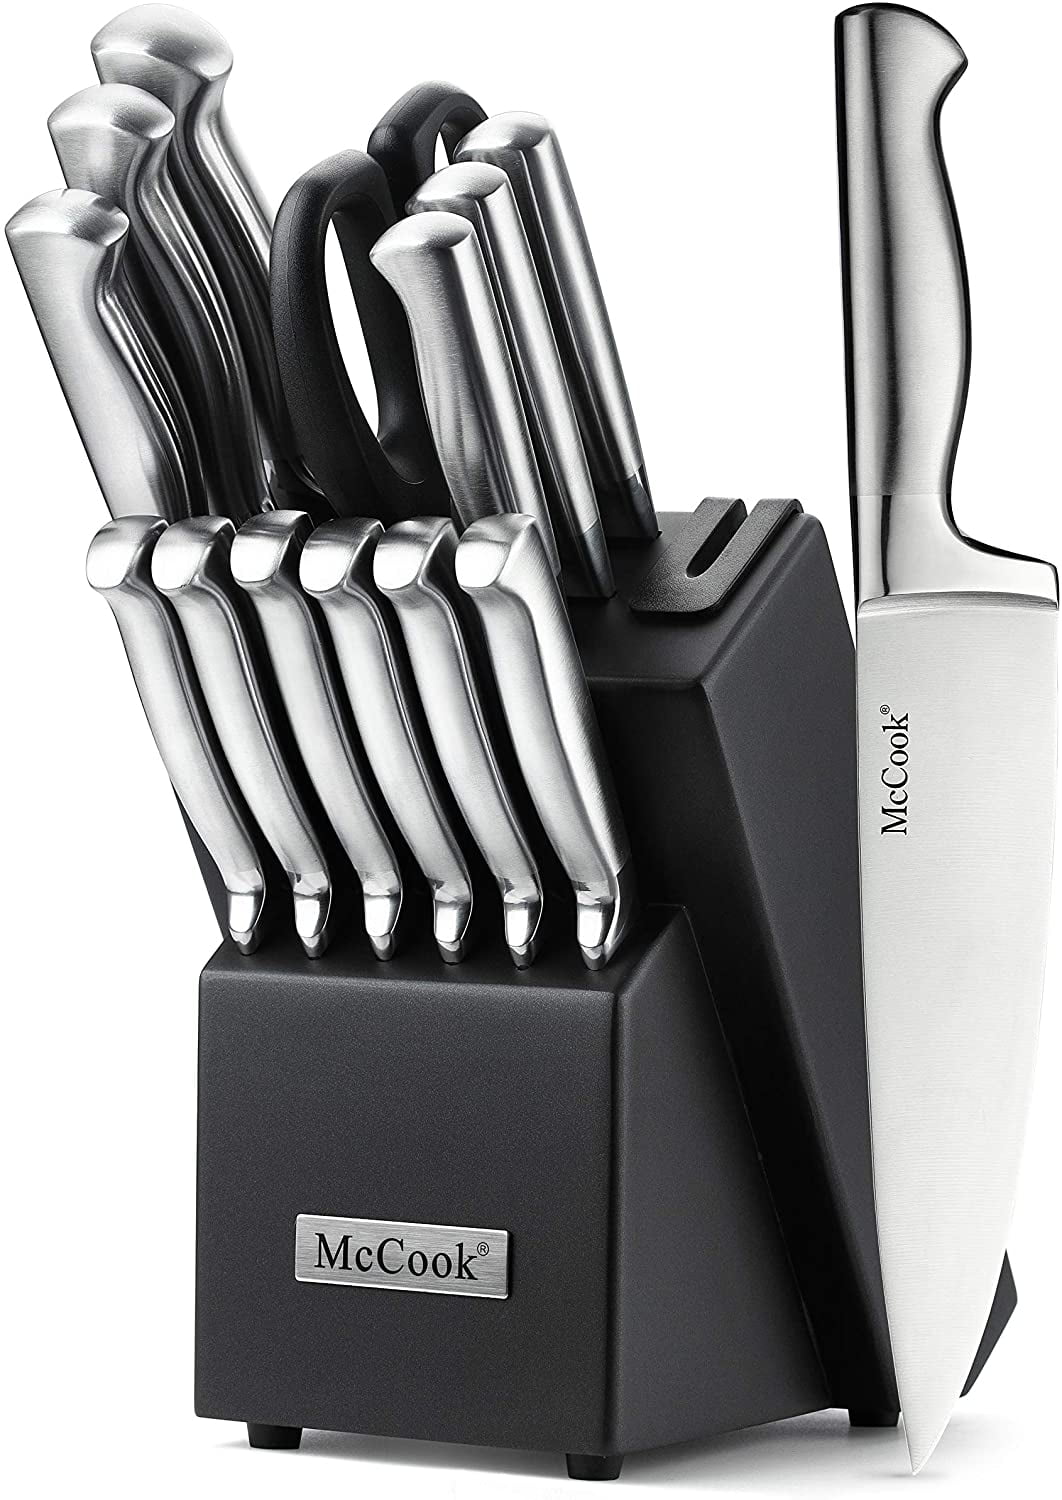 McCook MC21 15 Pieces Kitchen Knife Sets with Block Cutlery Knife Block Set